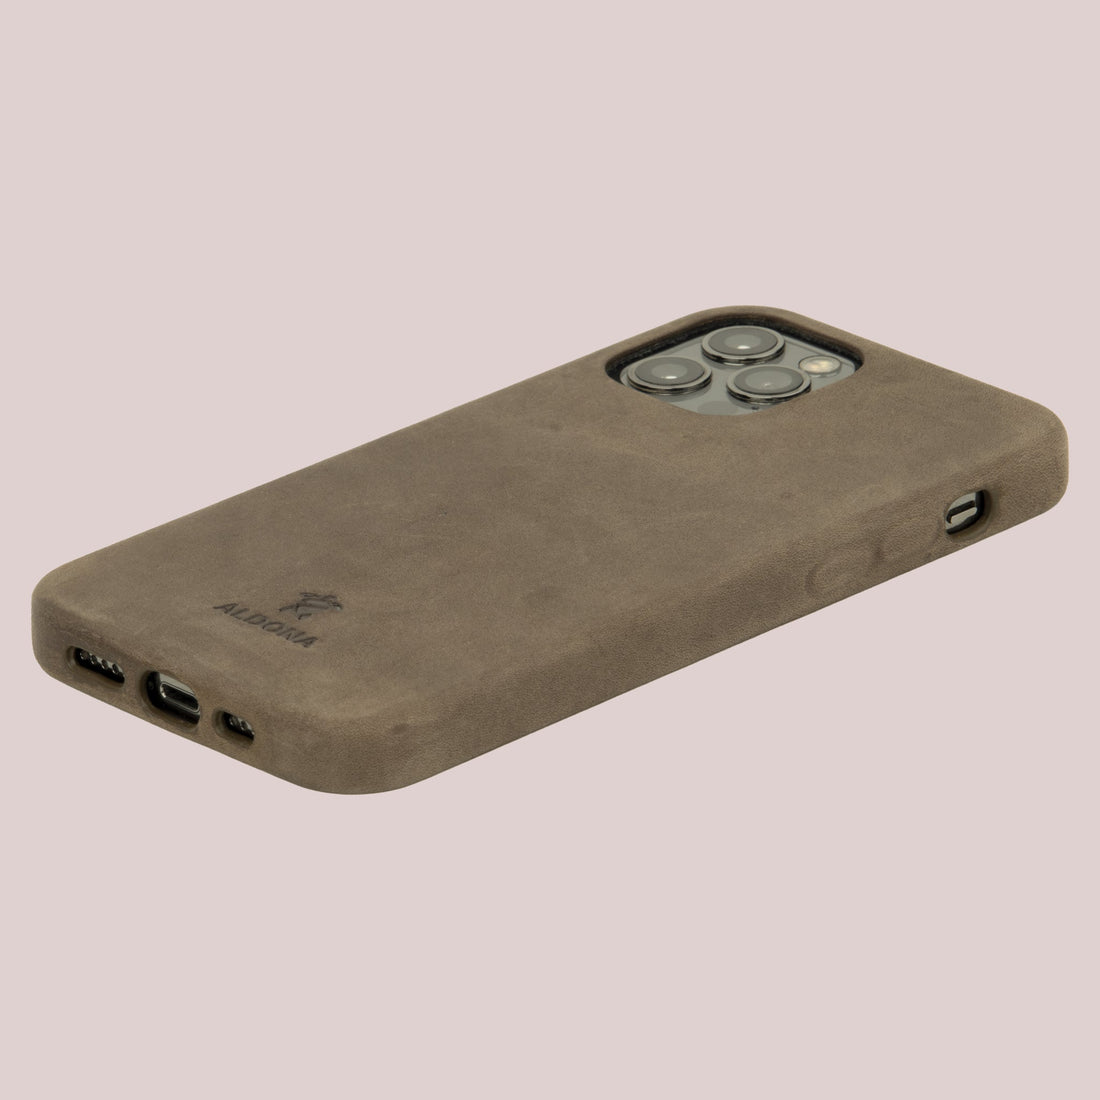 Kalon Case for iPhone 12 Mini with MagSafe Compatibility - Dark Soil